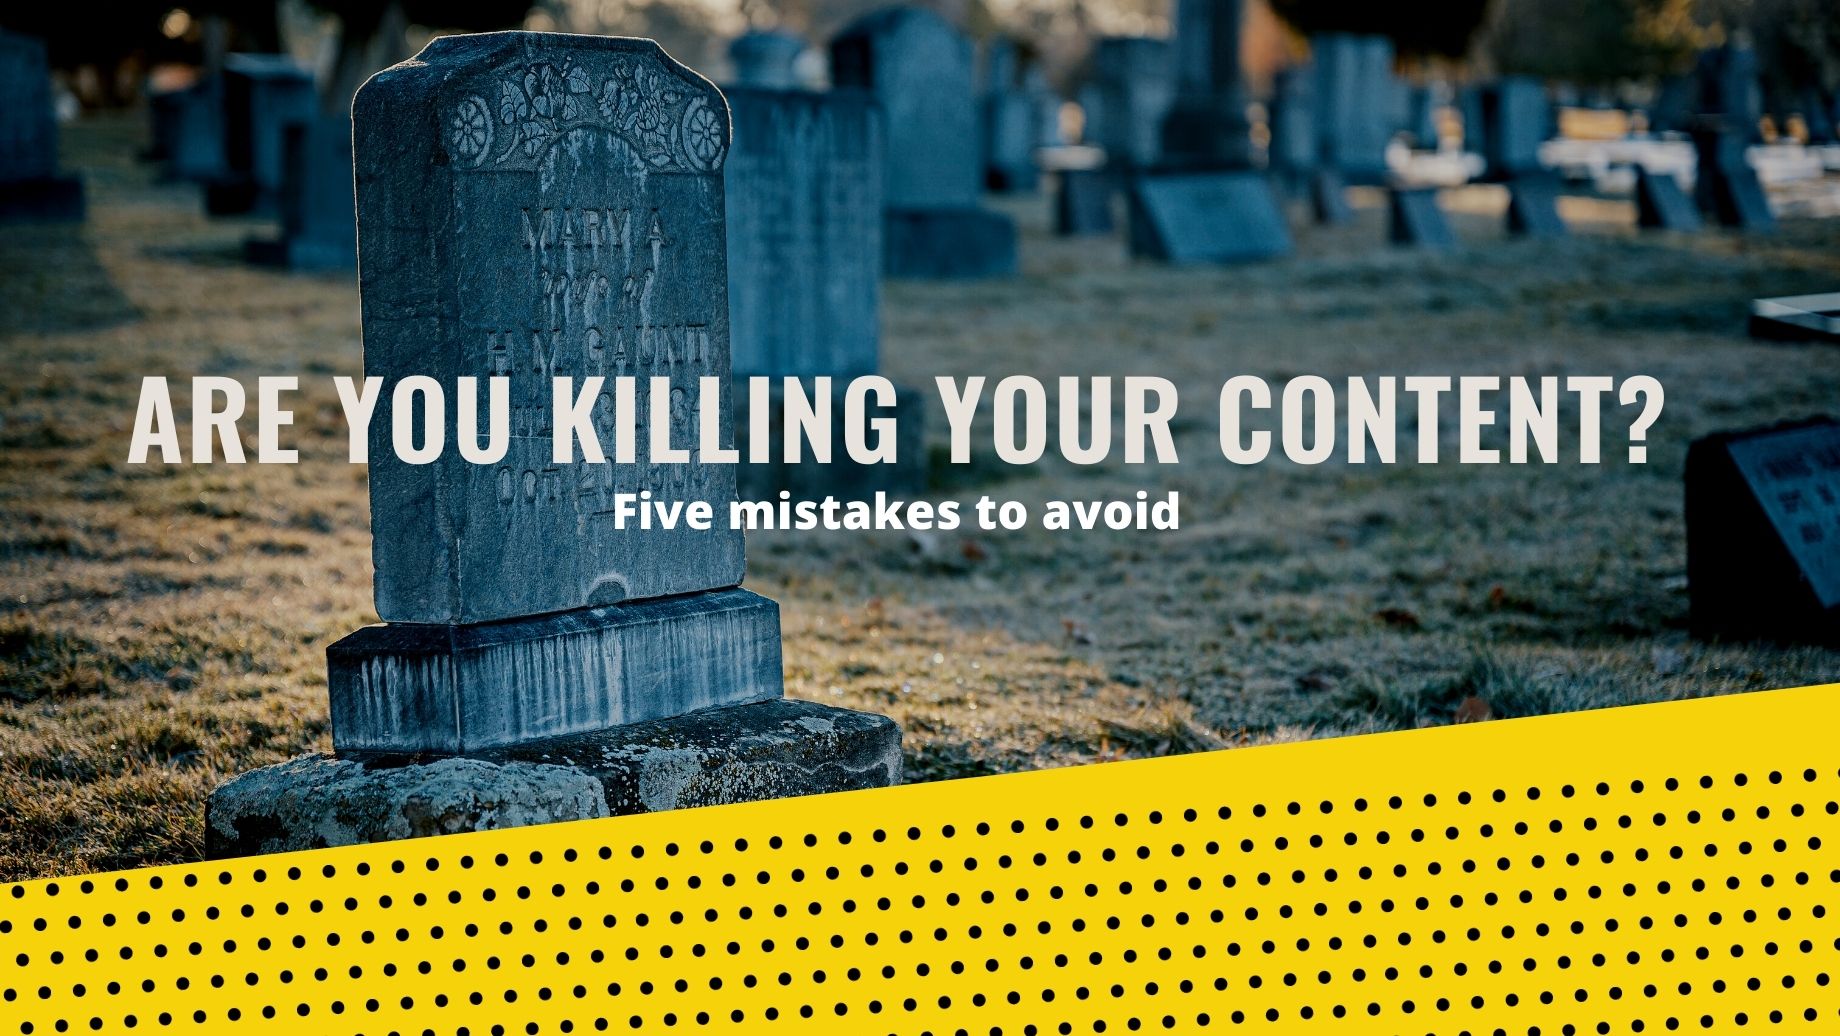 ARE YOU KILLING YOUR CONTENT